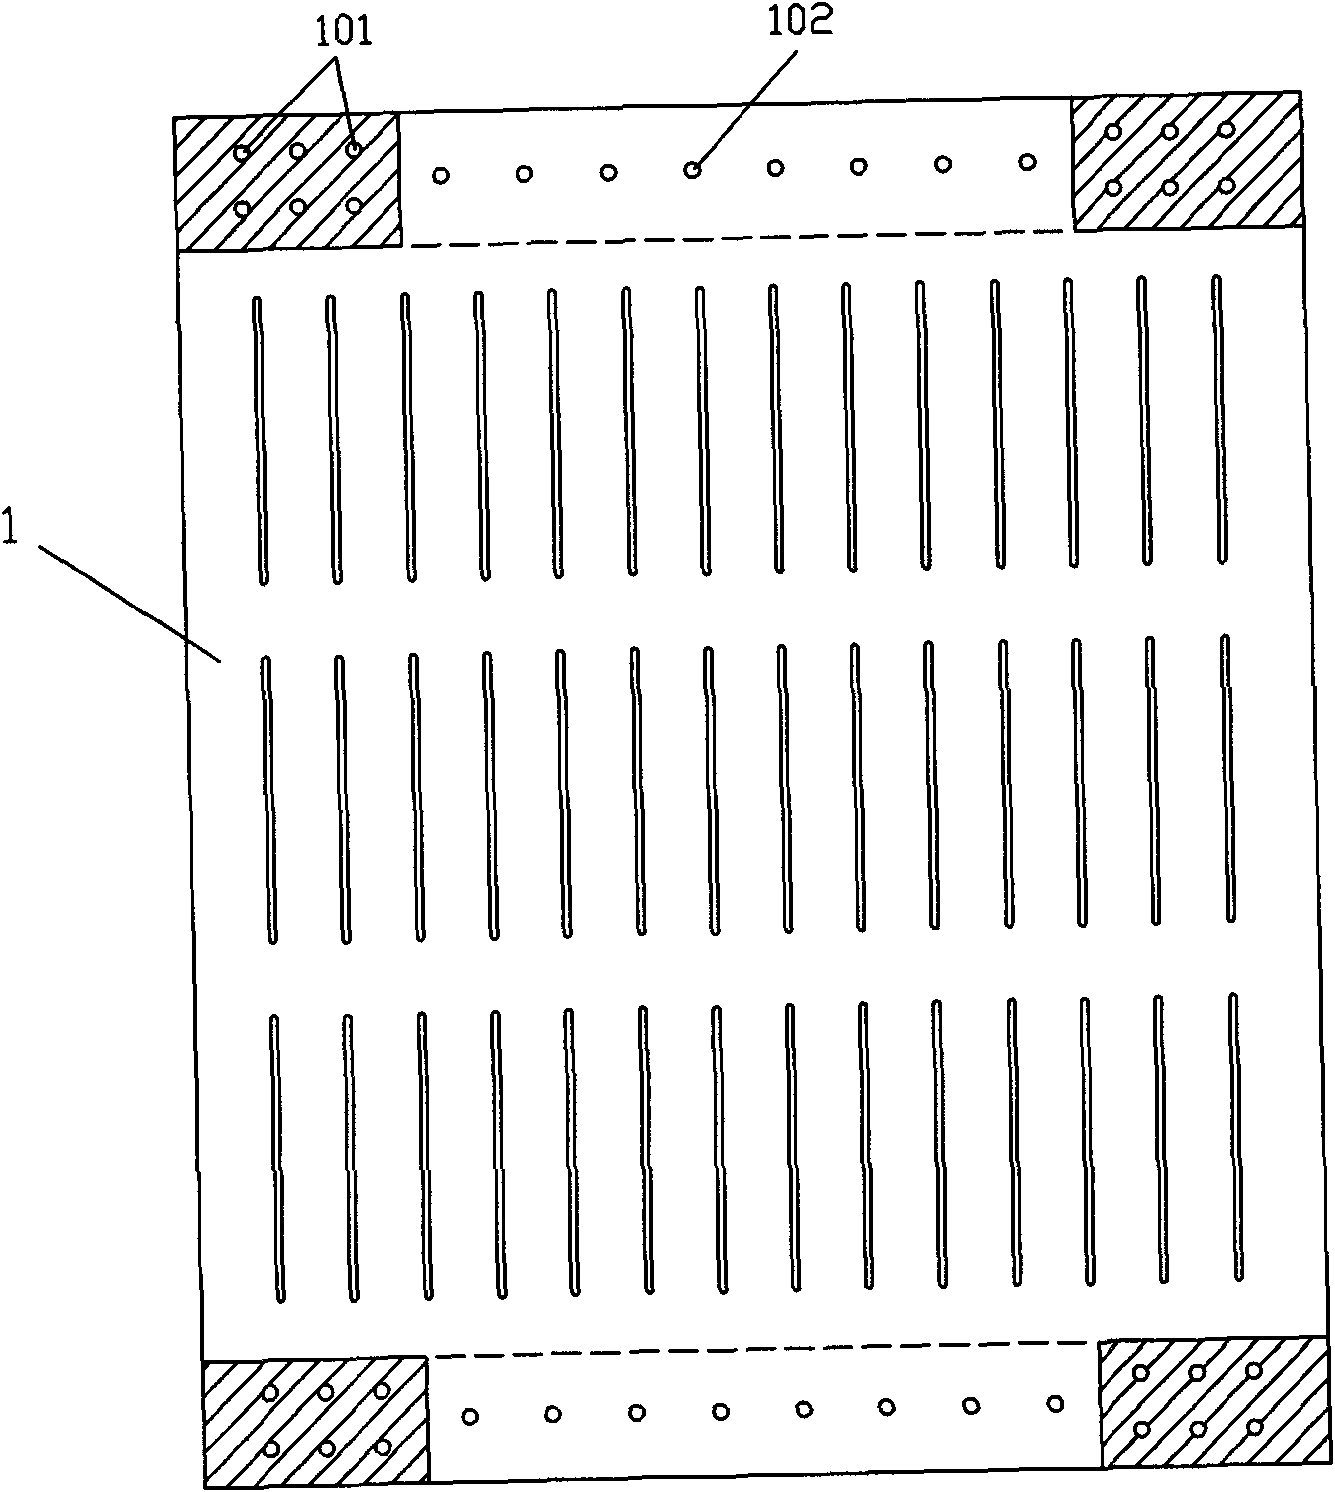 Structure for preventing bolt of steel plate shear wall with slits from slipping